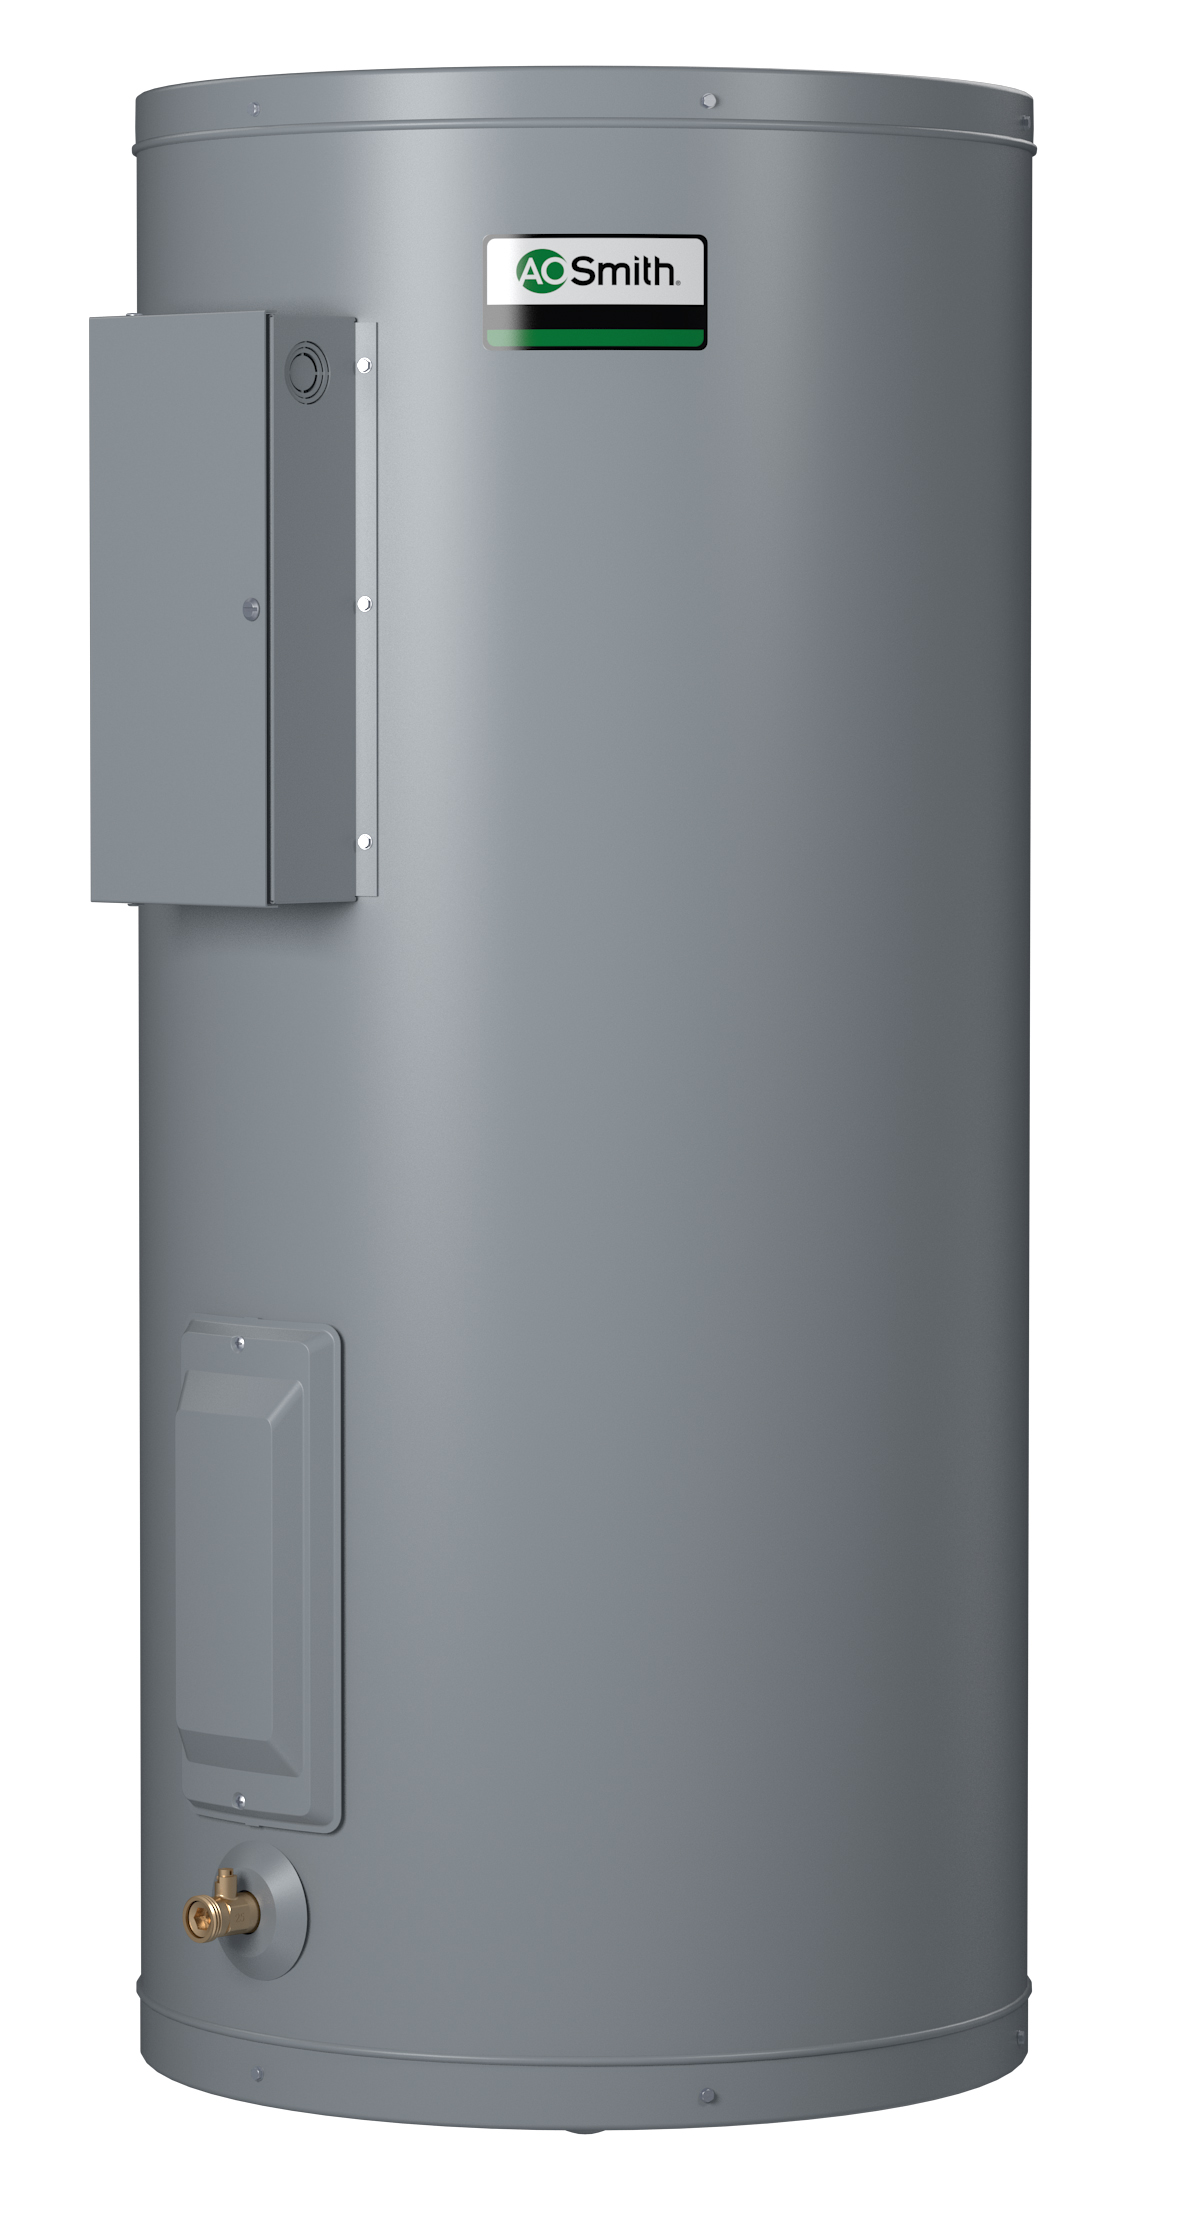 AO SMITH DEL-10S: 10 GALLONS, 5.5KW, 240 VOLT, 22.91 AMPS, 1 PHASE, SINGLE ELEMENT, LIGHT DUTY COMMERCIAL ELECTRIC WATER HEATER, DURA-POWER